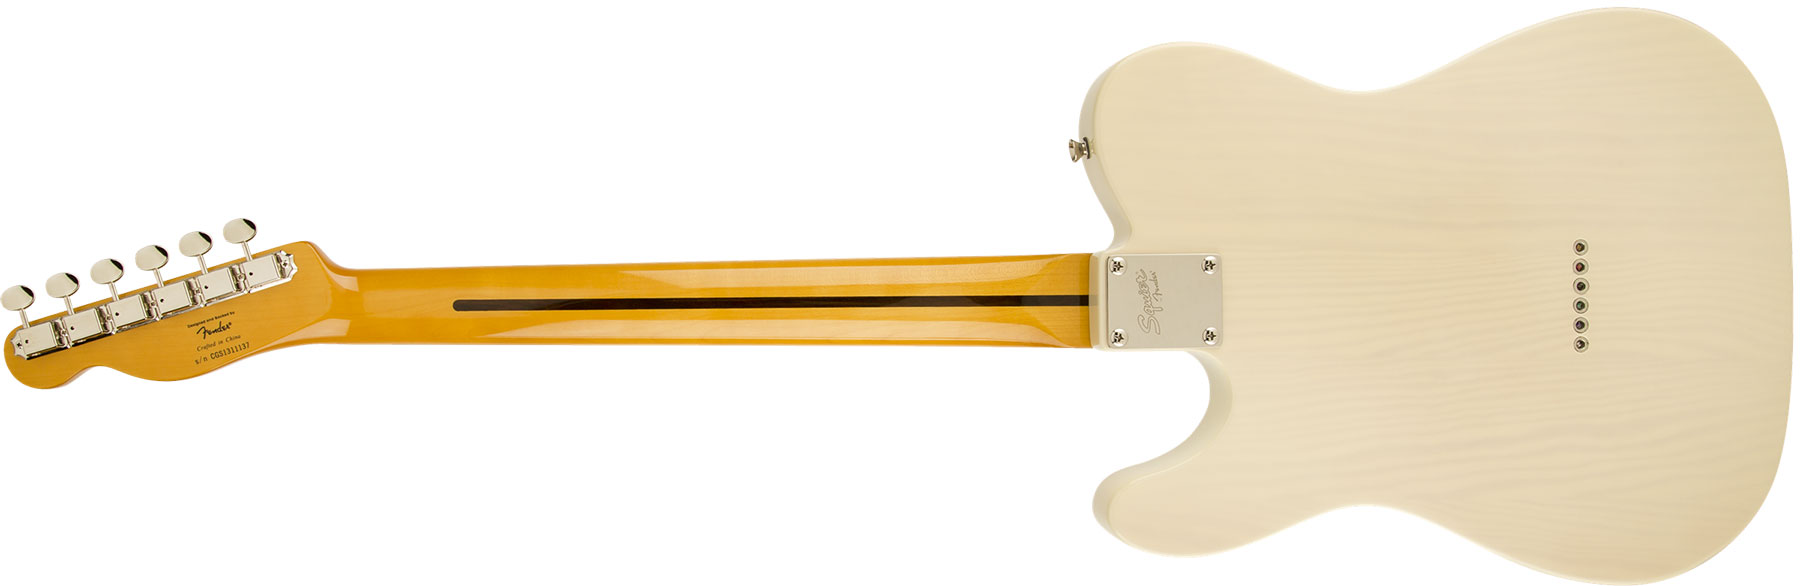 Squier Classic Vibe Telecaster '50s Mn - Vintage Blonde - Tel shape electric guitar - Variation 1